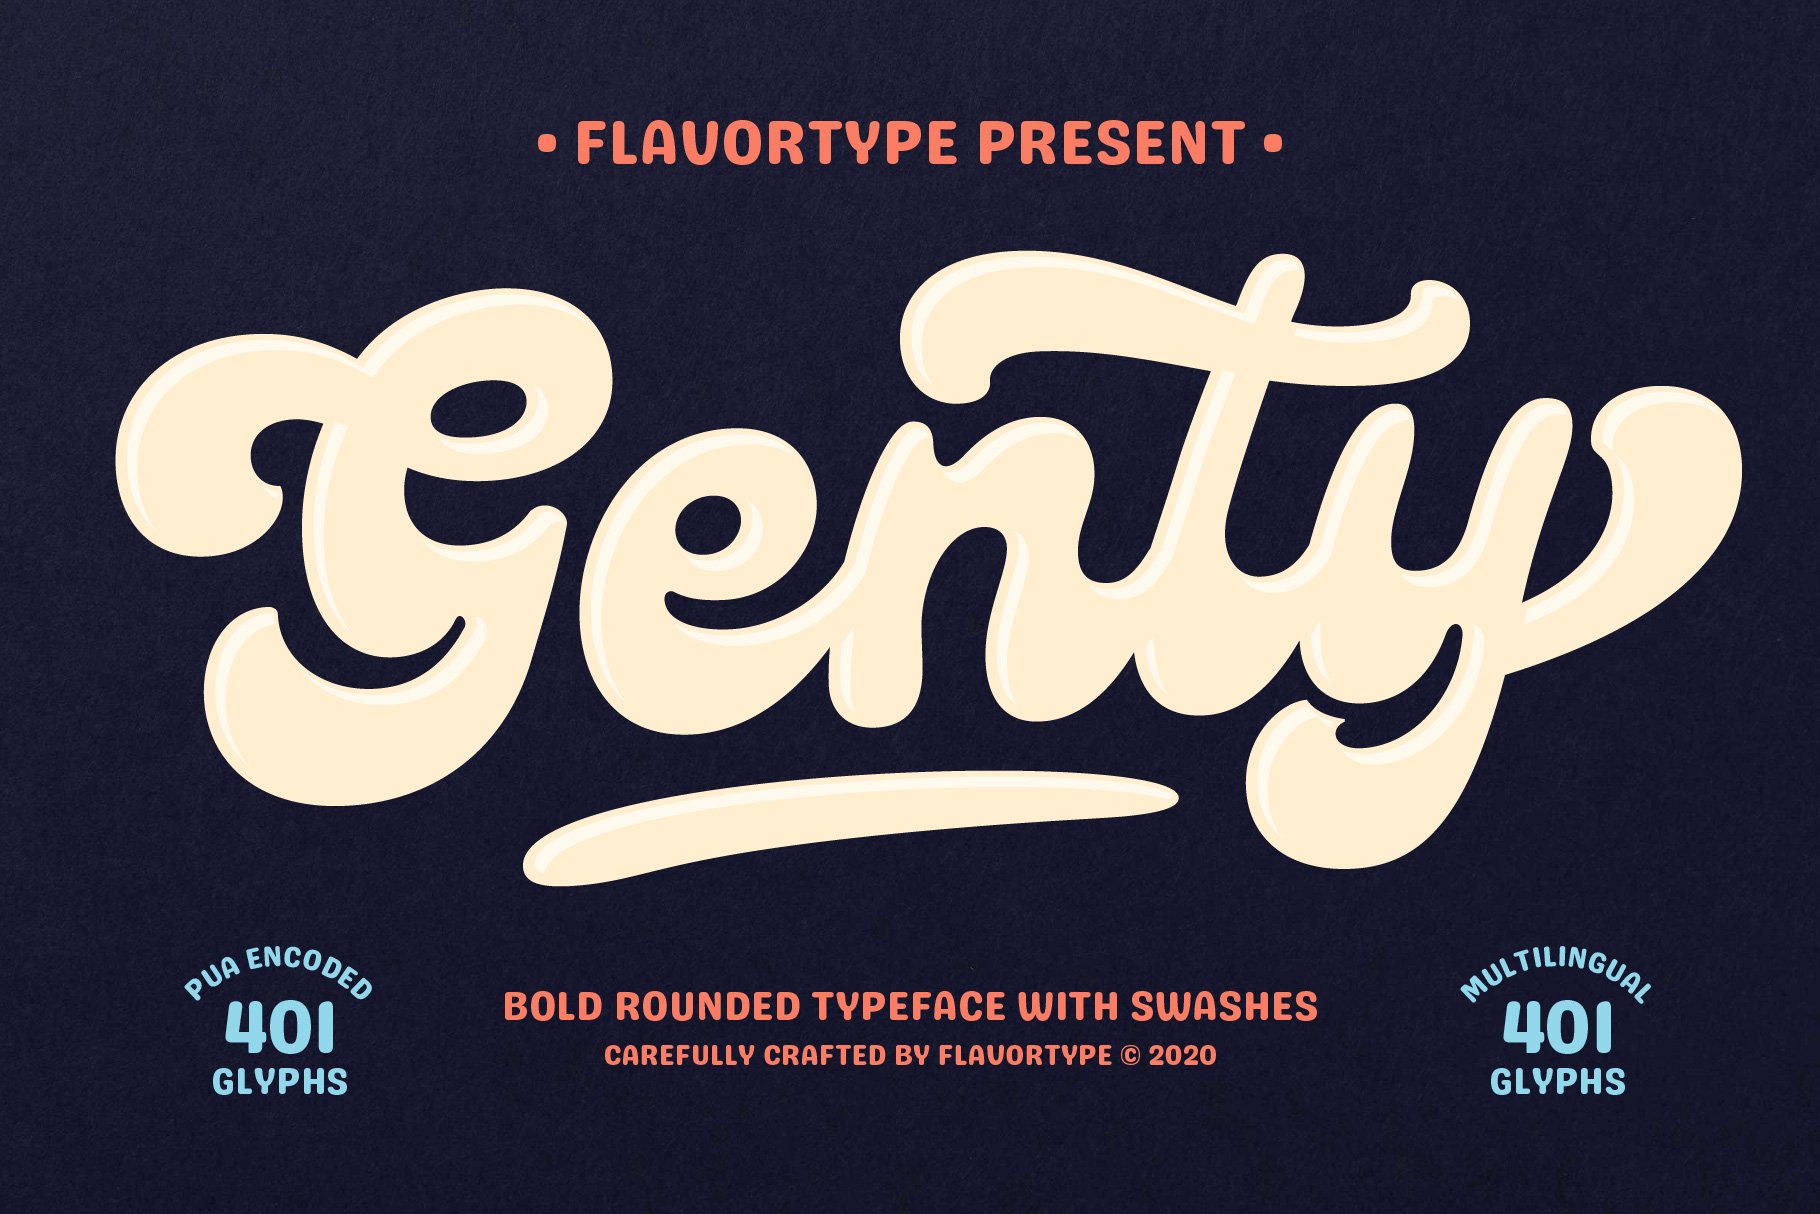 Genty - Bold Rounded Typeface cover image.